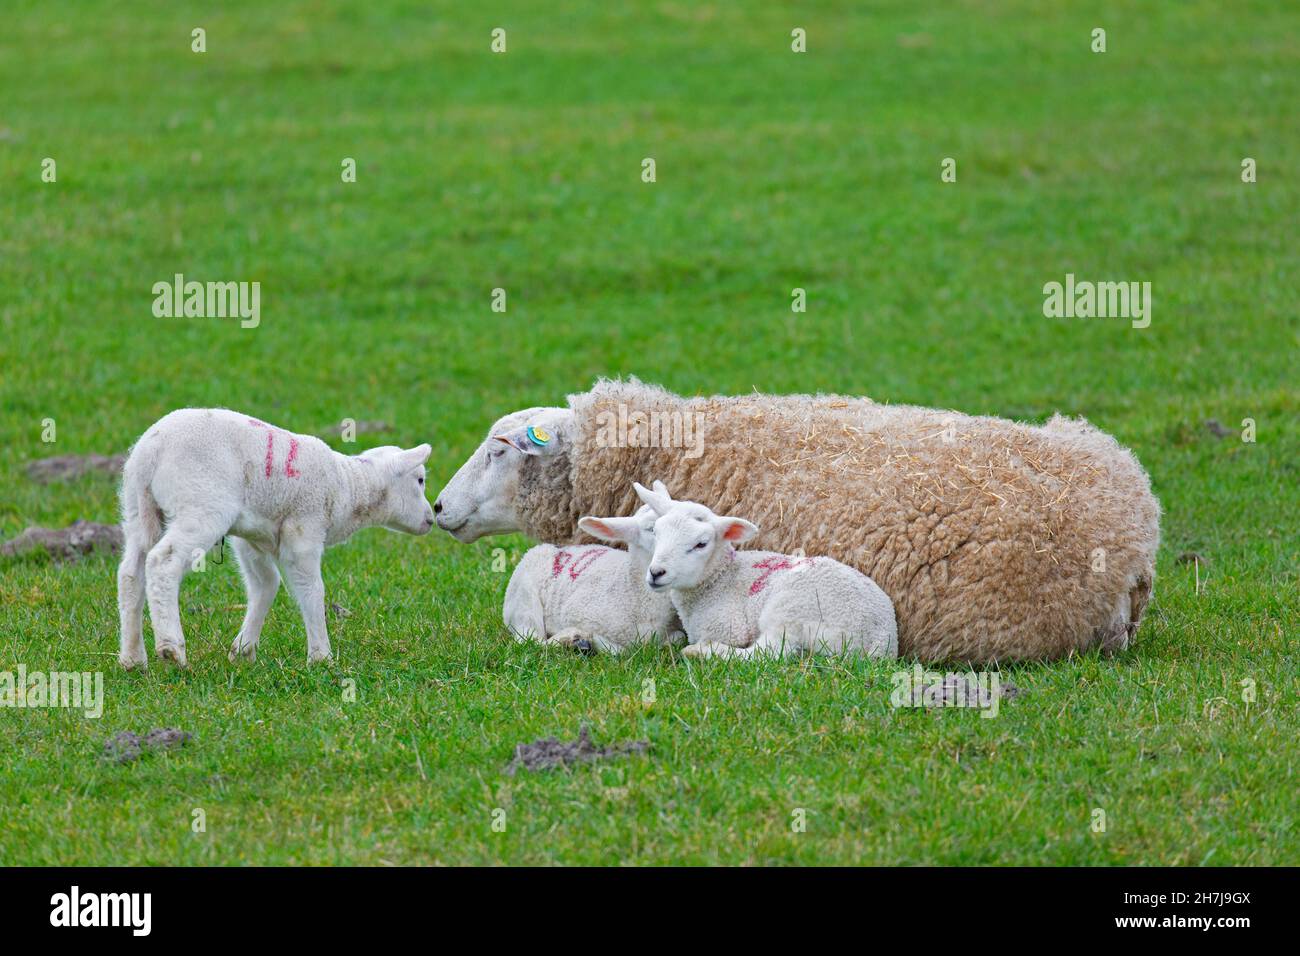 Domestic sheep ewe with three white lambs resting huddled together in field / pasture Stock Photo